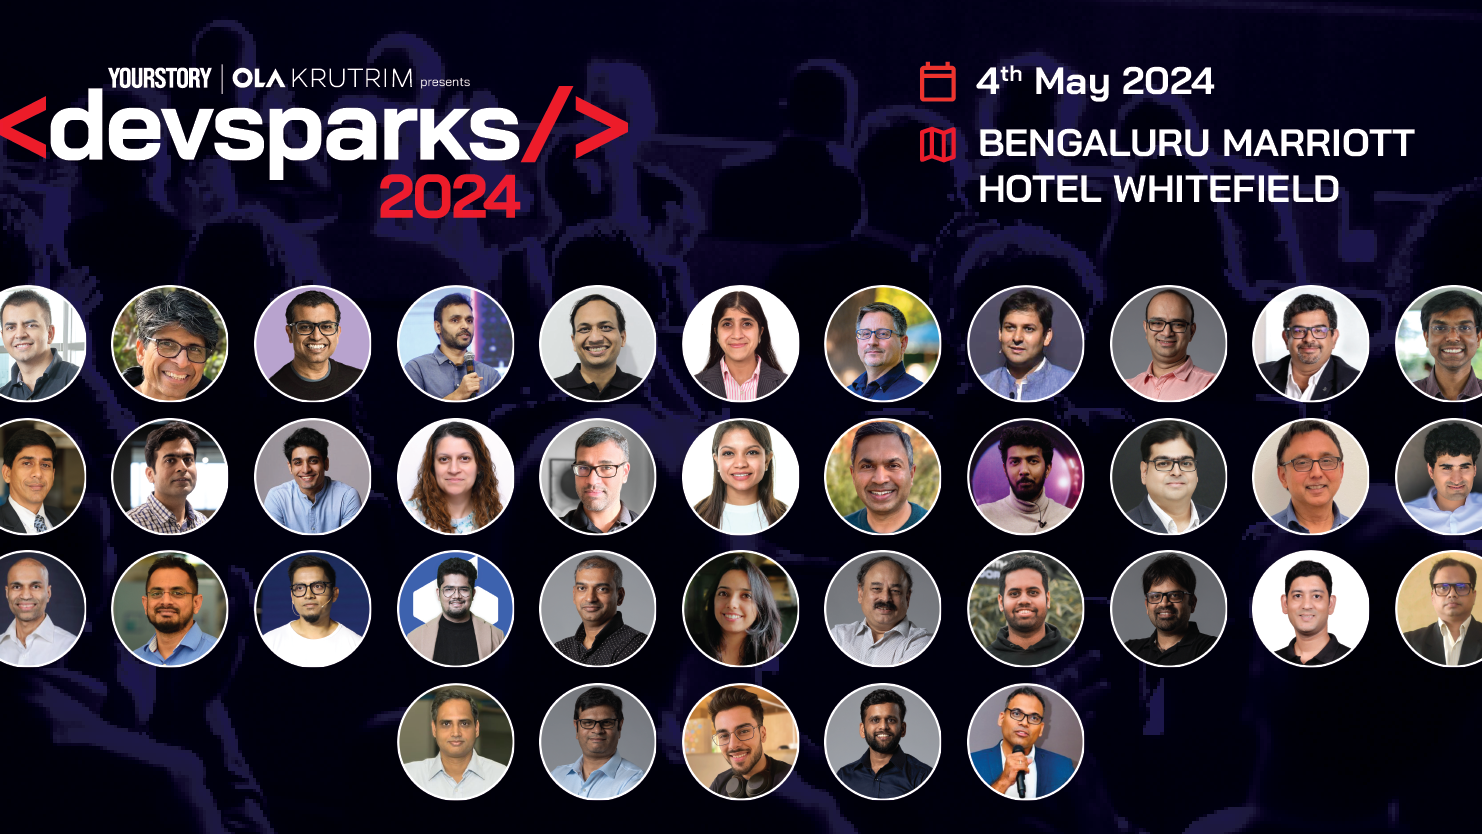 Ready, Bengaluru? YourStory's premiere developer summit DevSparks 2024 launches today